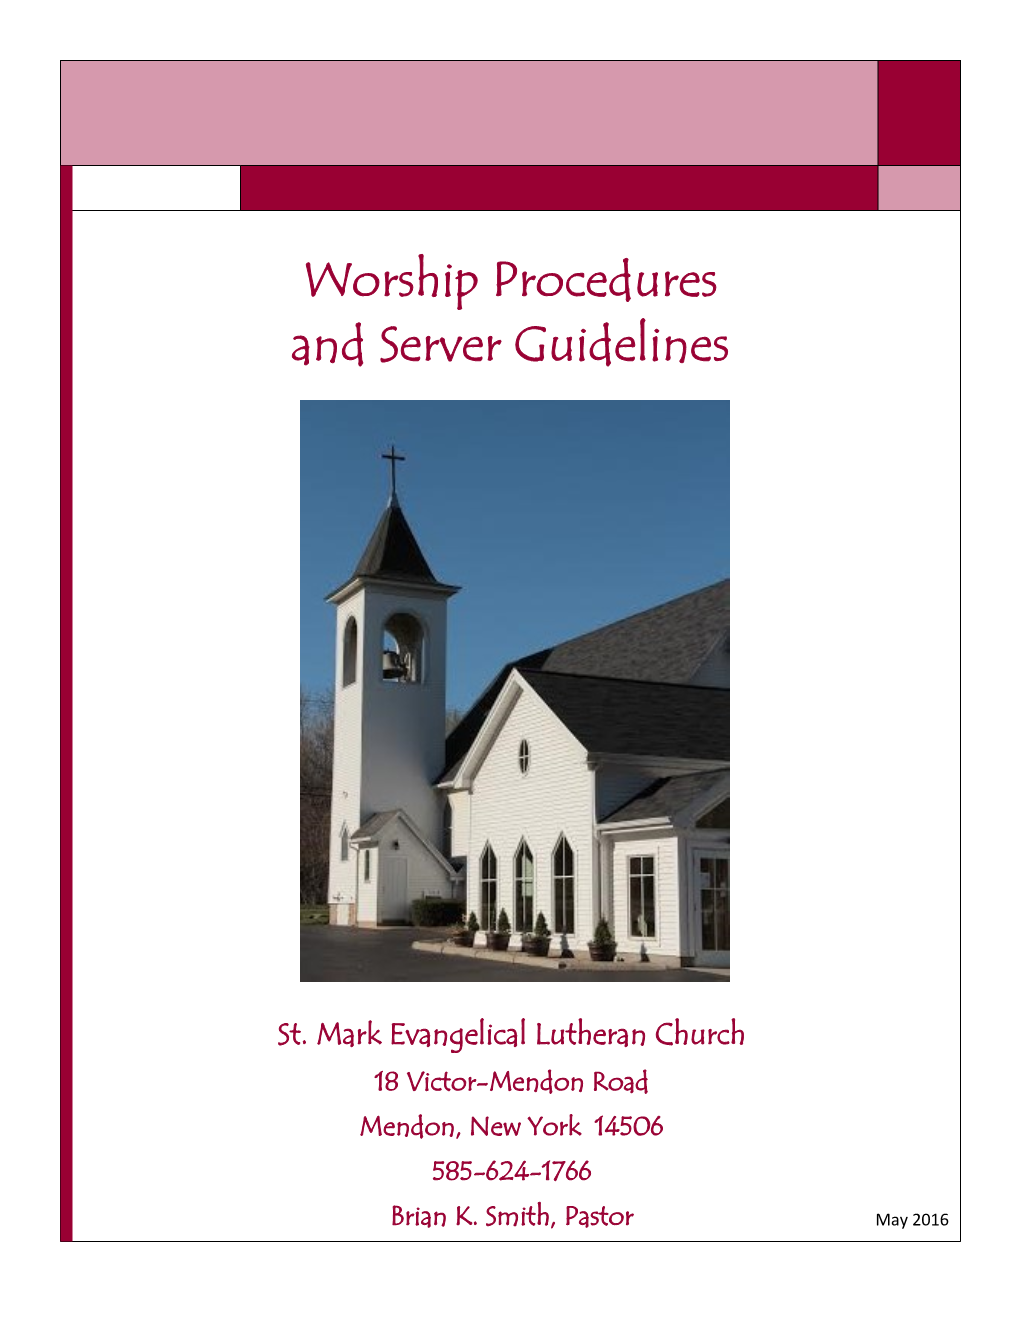 Worship Procedures and Server Guidelines